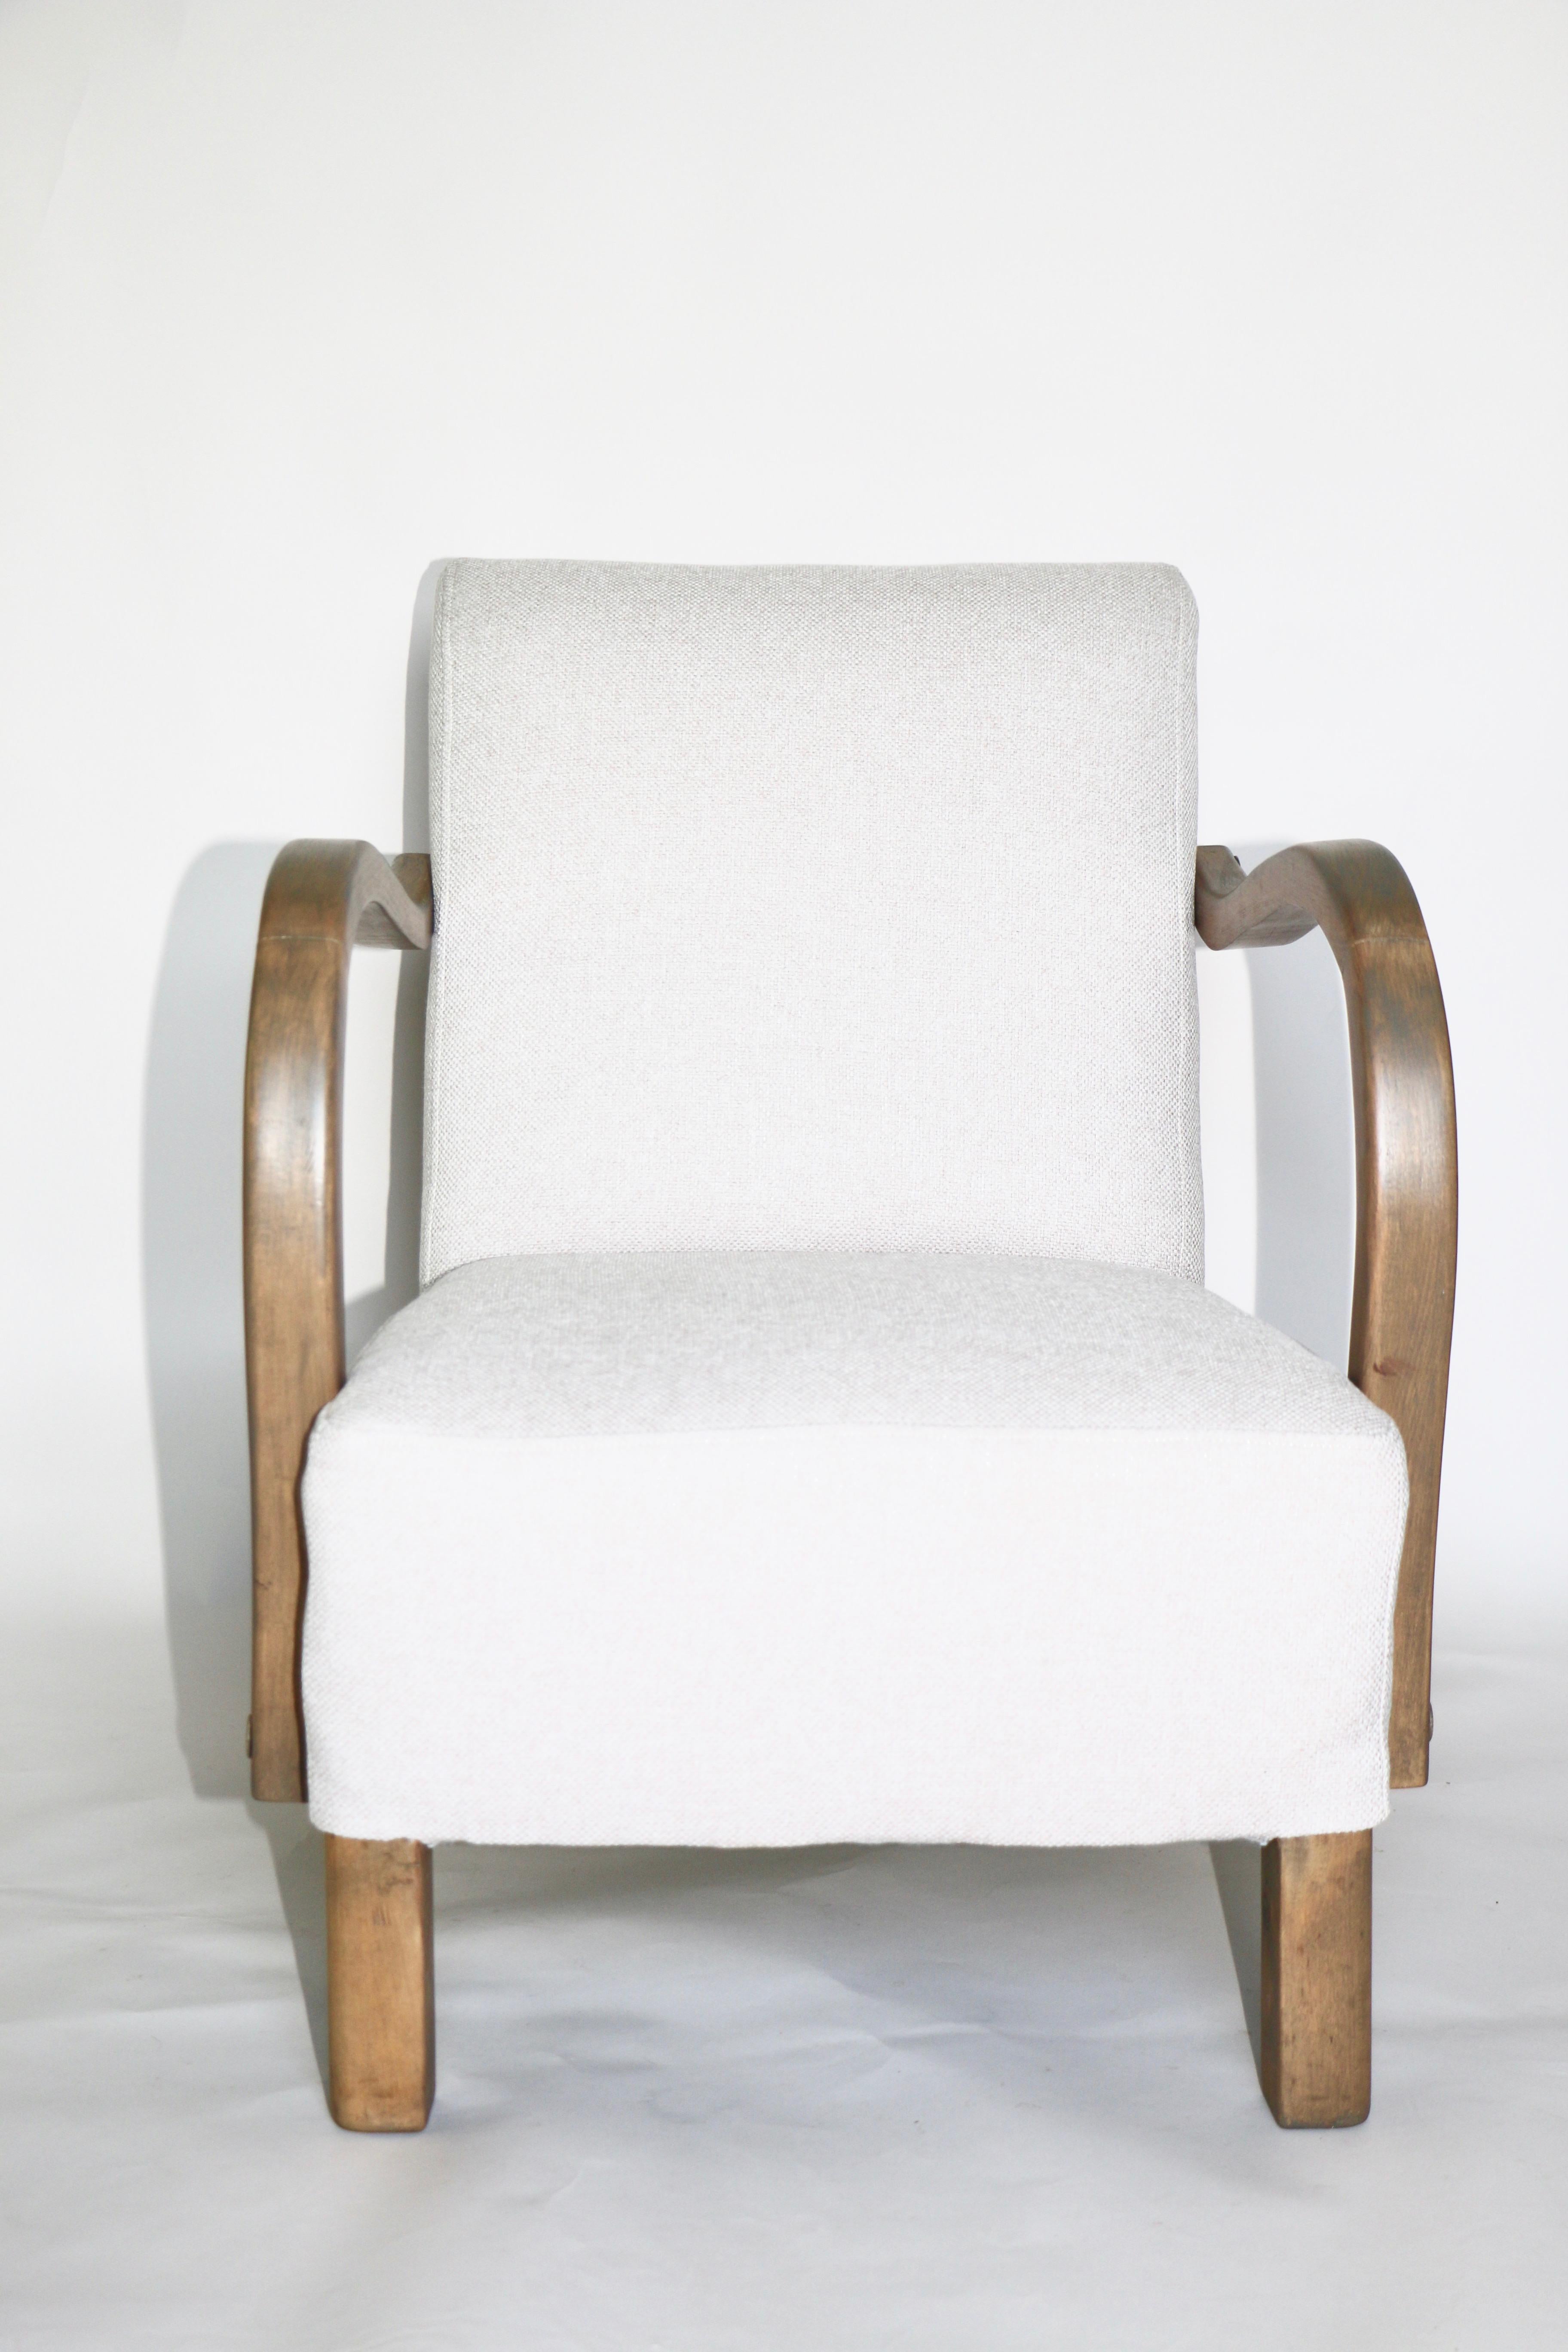 Restored Art Deco armchair in beige from 1960s, new upholstery covered with structural fabric in fashionable beige color, finished with wooden chair cushion. Wooden elements in grey wood wax color. Good condition.

Dimension: H 82 x W 64 x D 75.